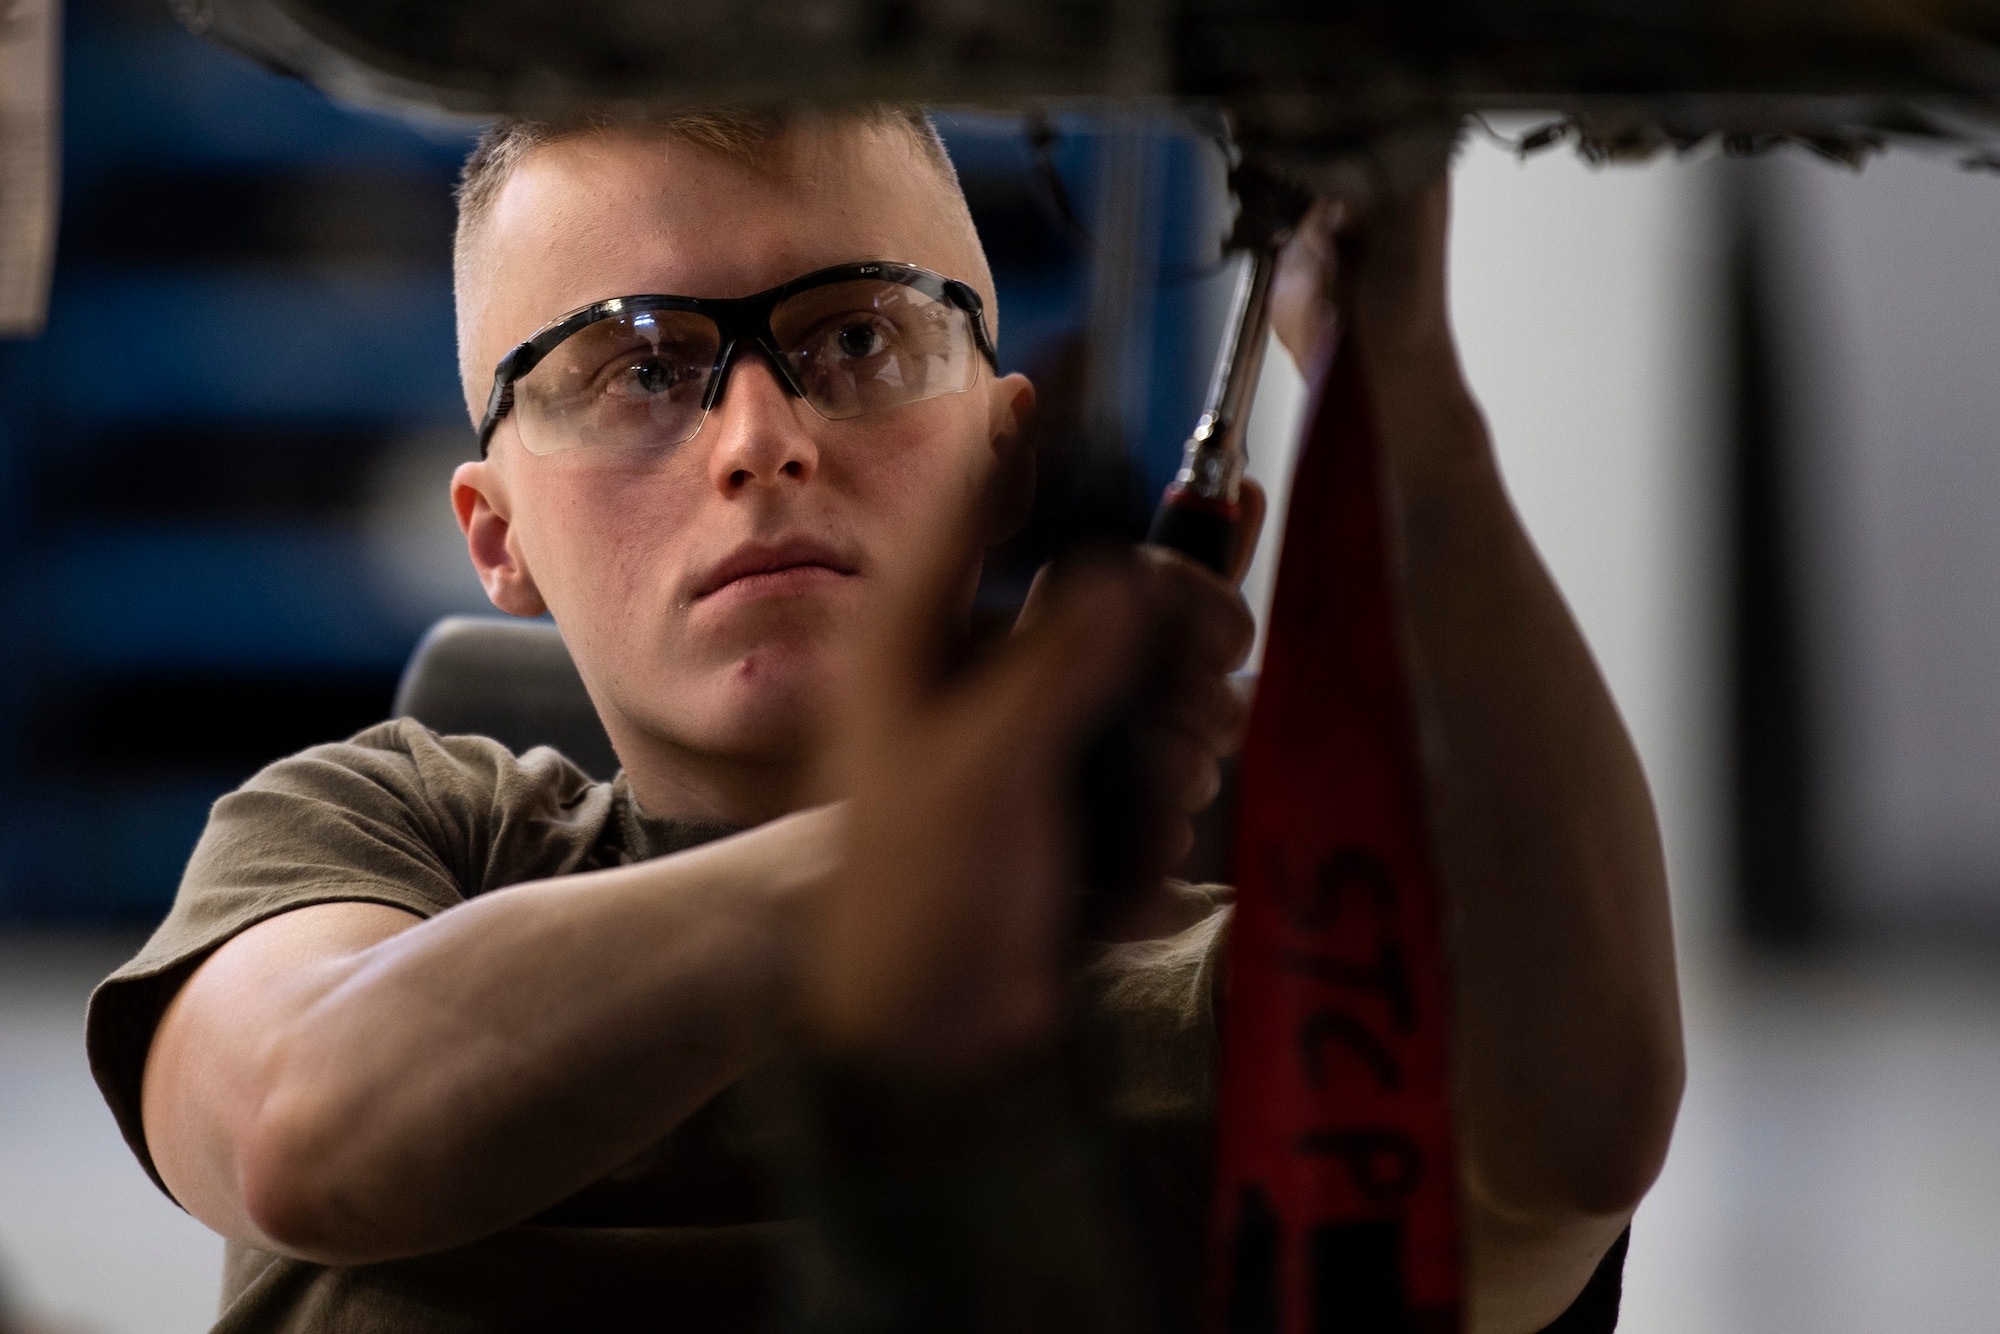 U.S. Air Force Senior Airman Tanner Sterner, 52nd Maintenance Squadron aerospace propulsion journeyman, manually rotates jet engine components during an inspection at Spangdahlem Air Base, Germany, Feb. 25, 2020. Sterner helped check for discrepancies to prevent issues arising. The 52nd MXS Propulsion Flight recently won the Air Force Chief of Safety: Aviation Safety award for their excellent record of quality assurance. (U.S. Air Force photo by Airman 1st Class Valerie Seelye)